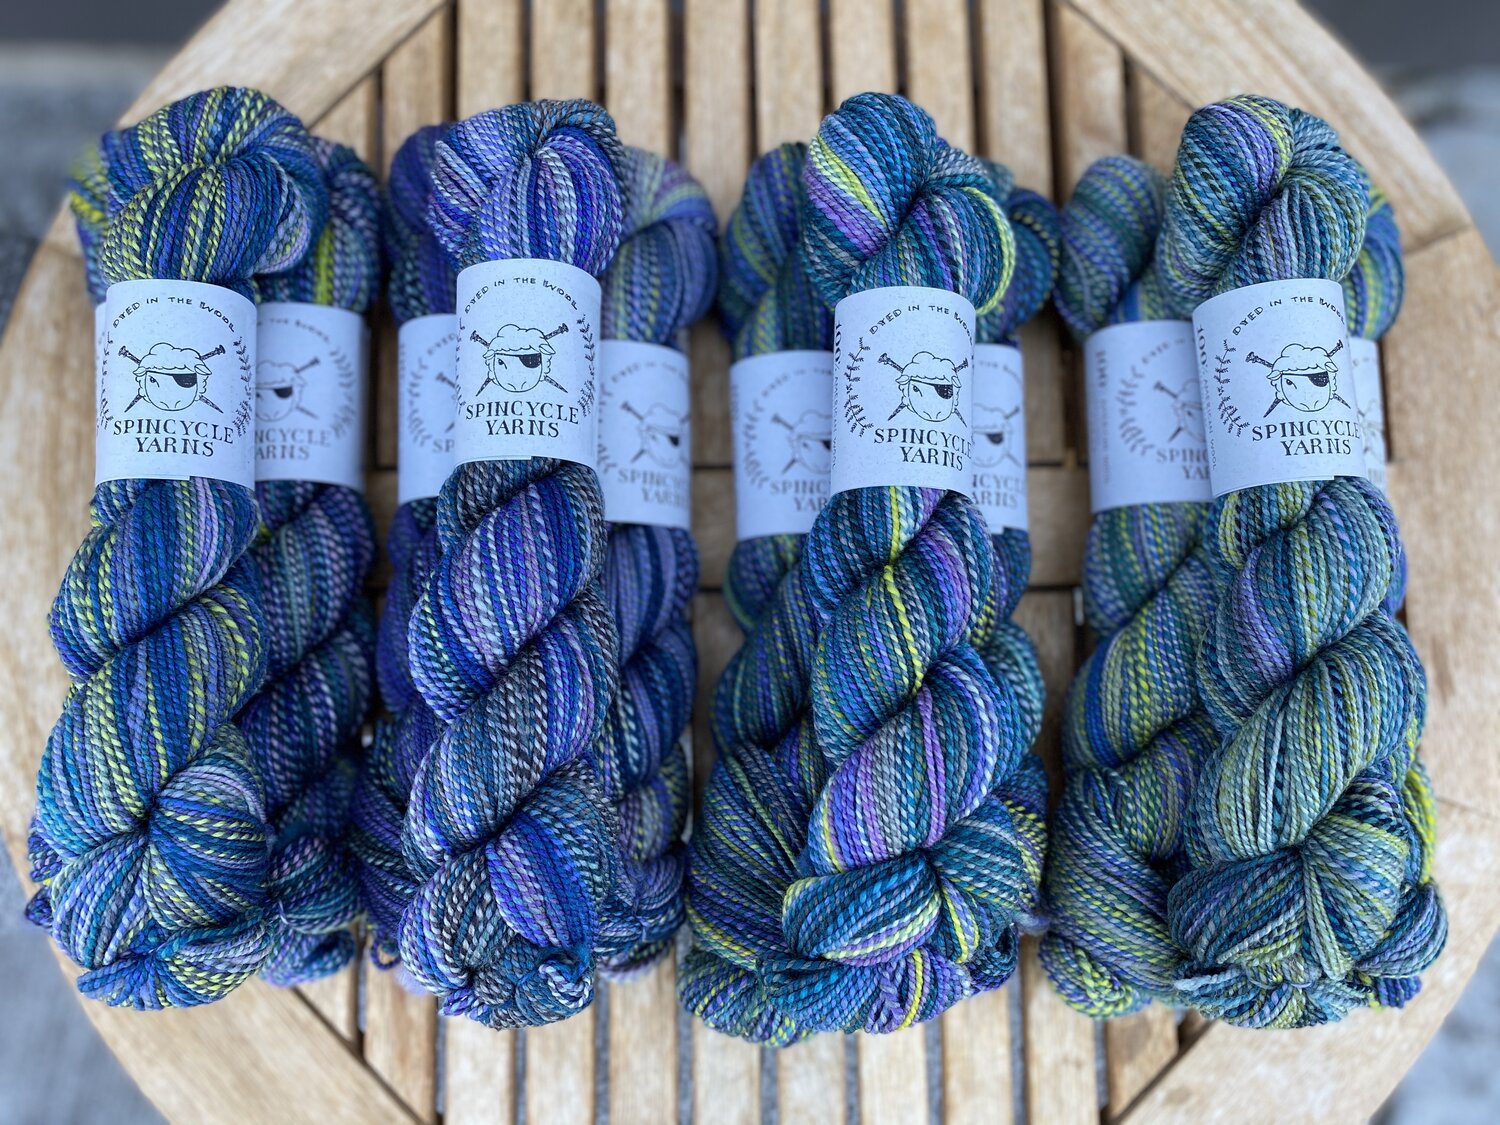 BRIGHT IDEA - Dyed In The Wool – Spincycle Yarns